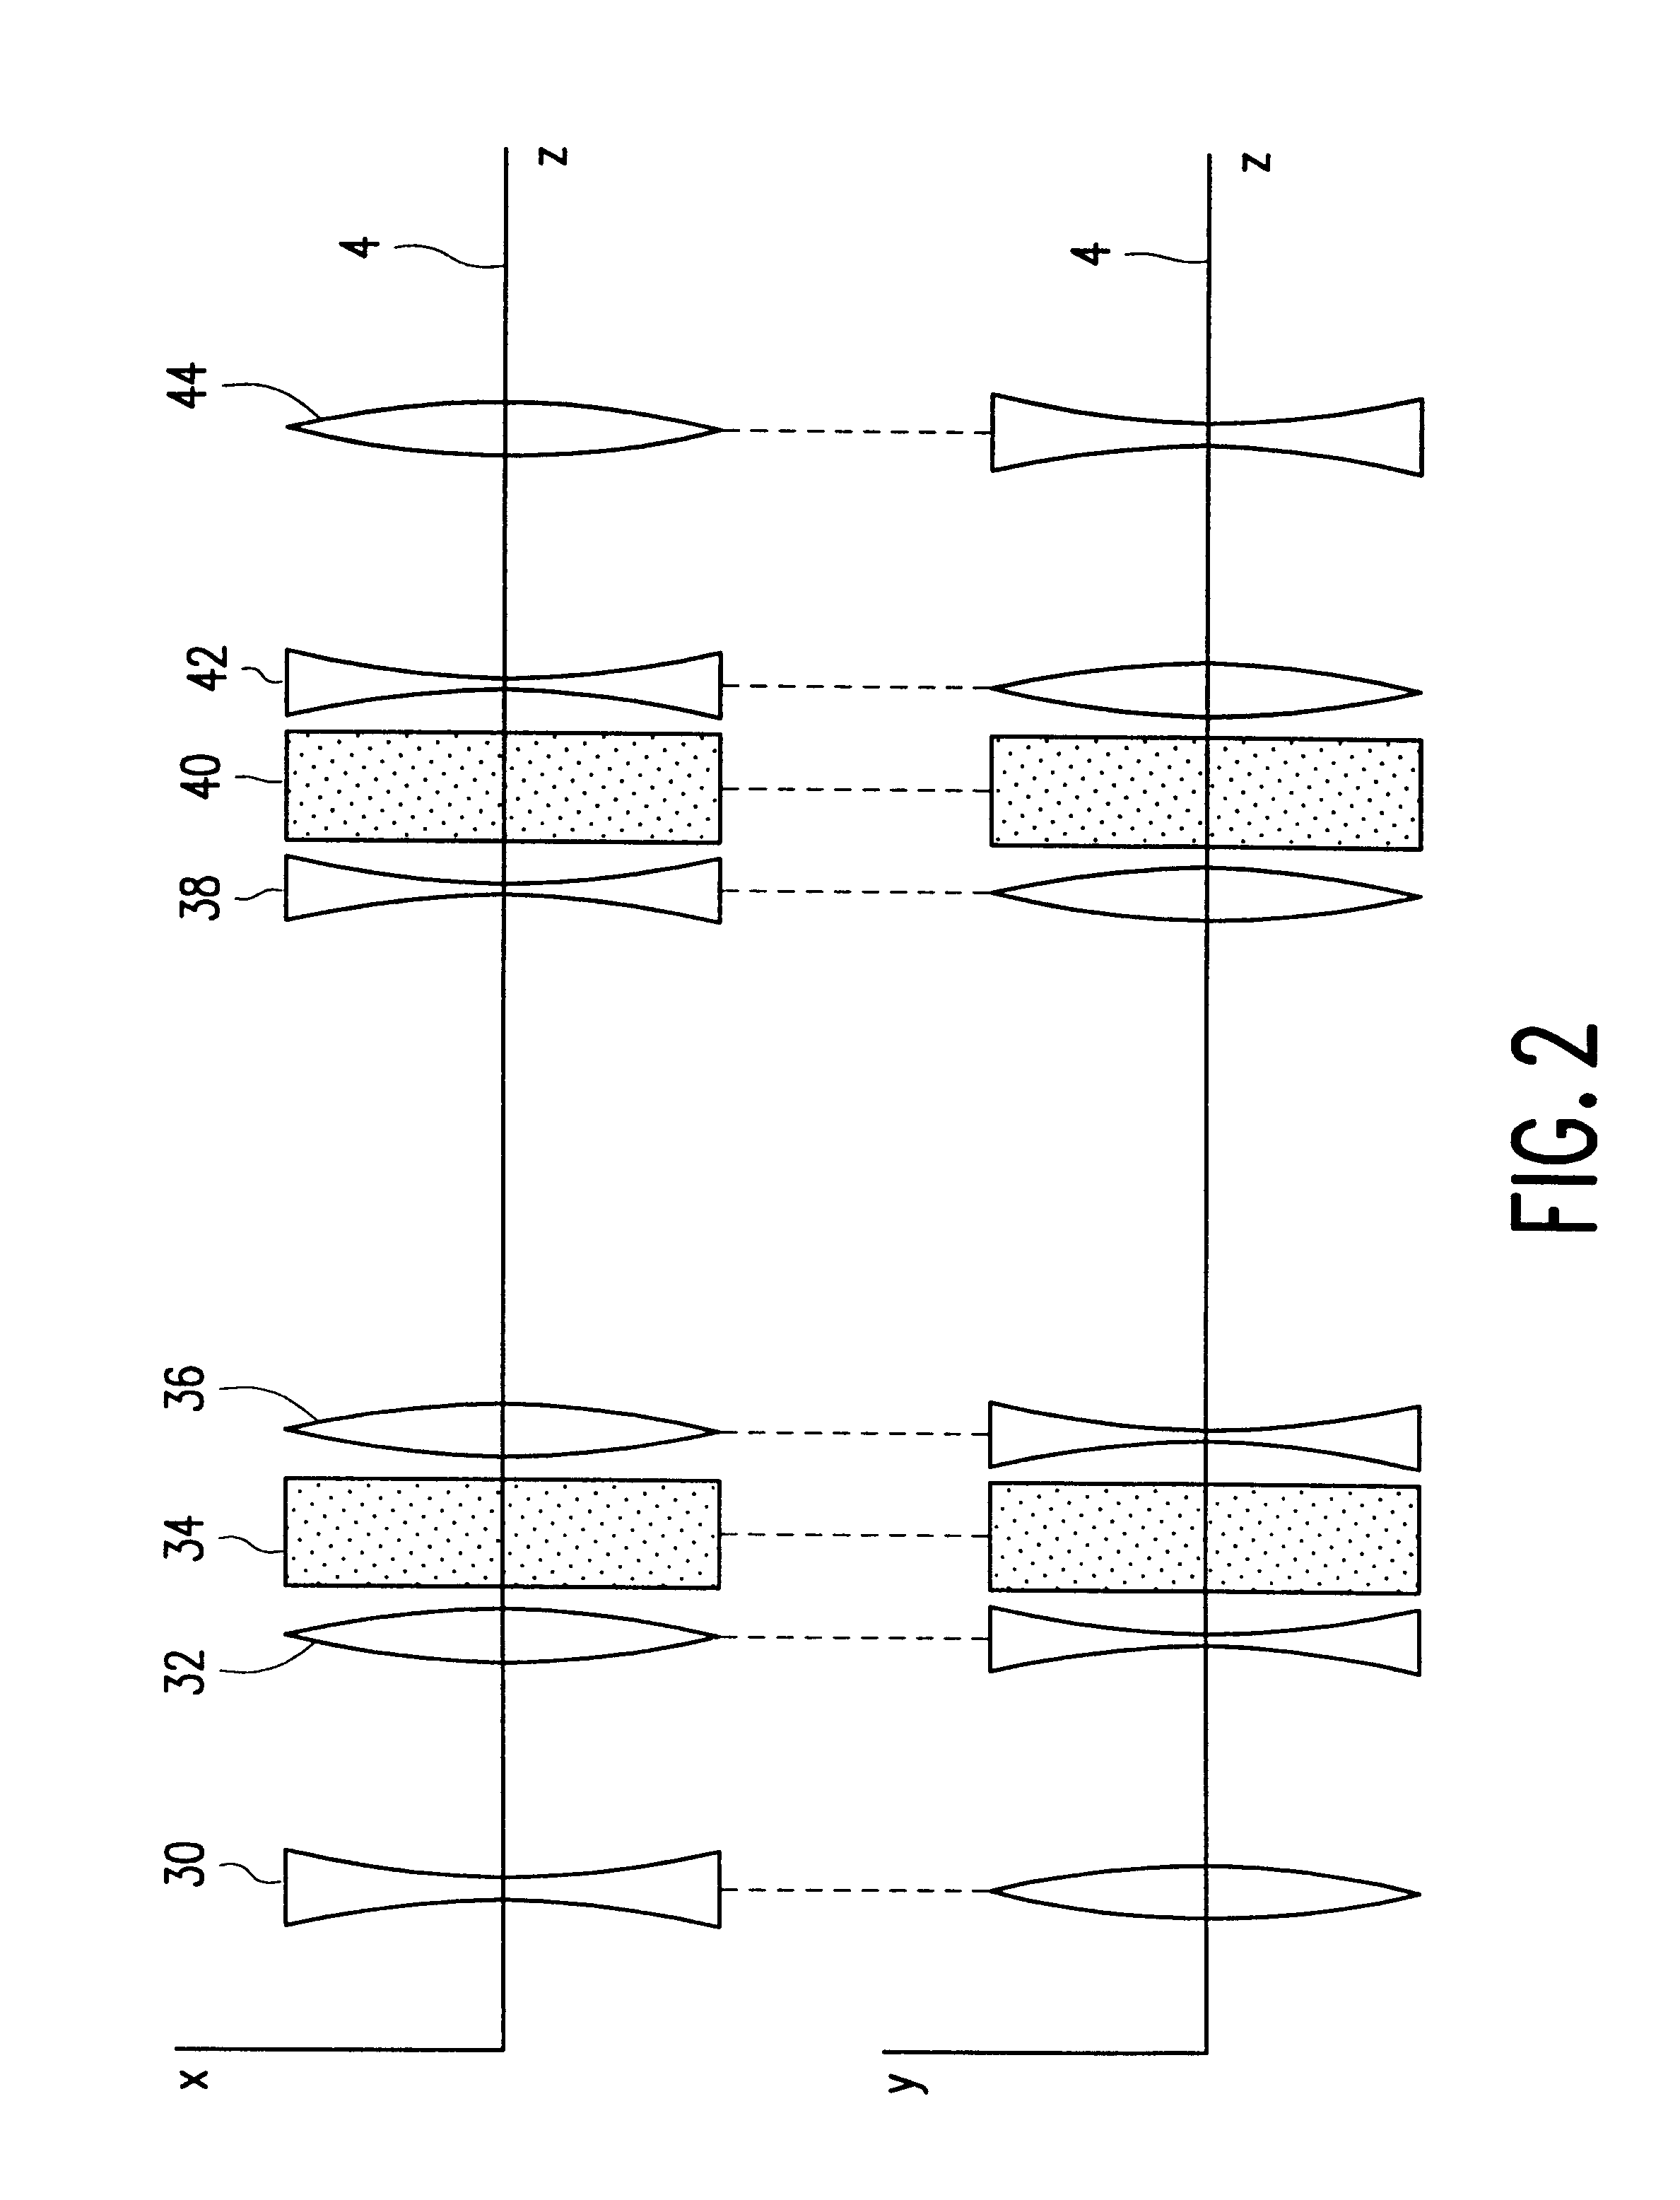 Electrostatic device for correcting chromatic aberration in a particle-optical apparatus